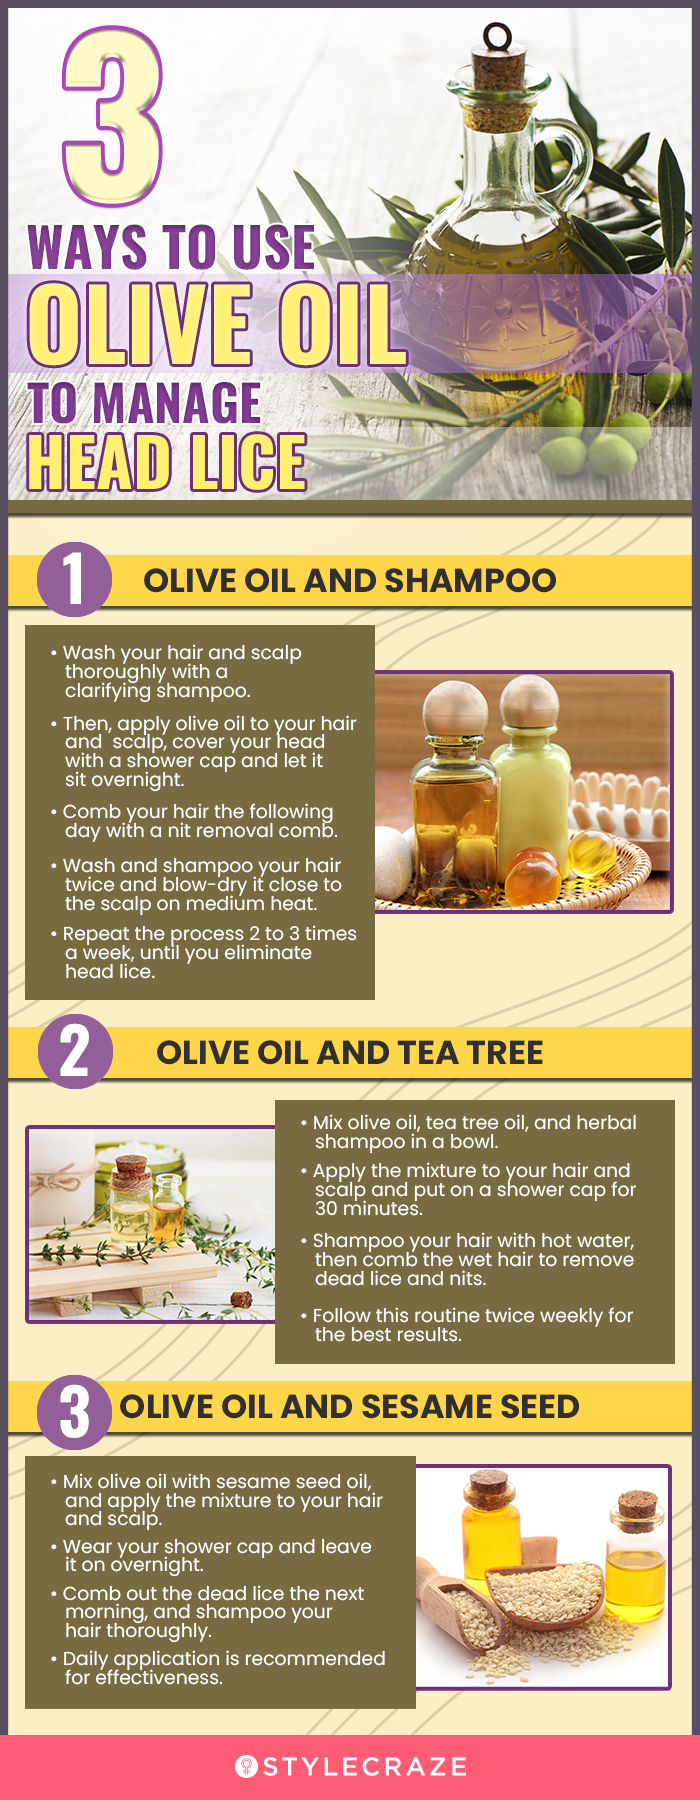 Olive Oil For Head Lice: Is it An Effective Treatment?